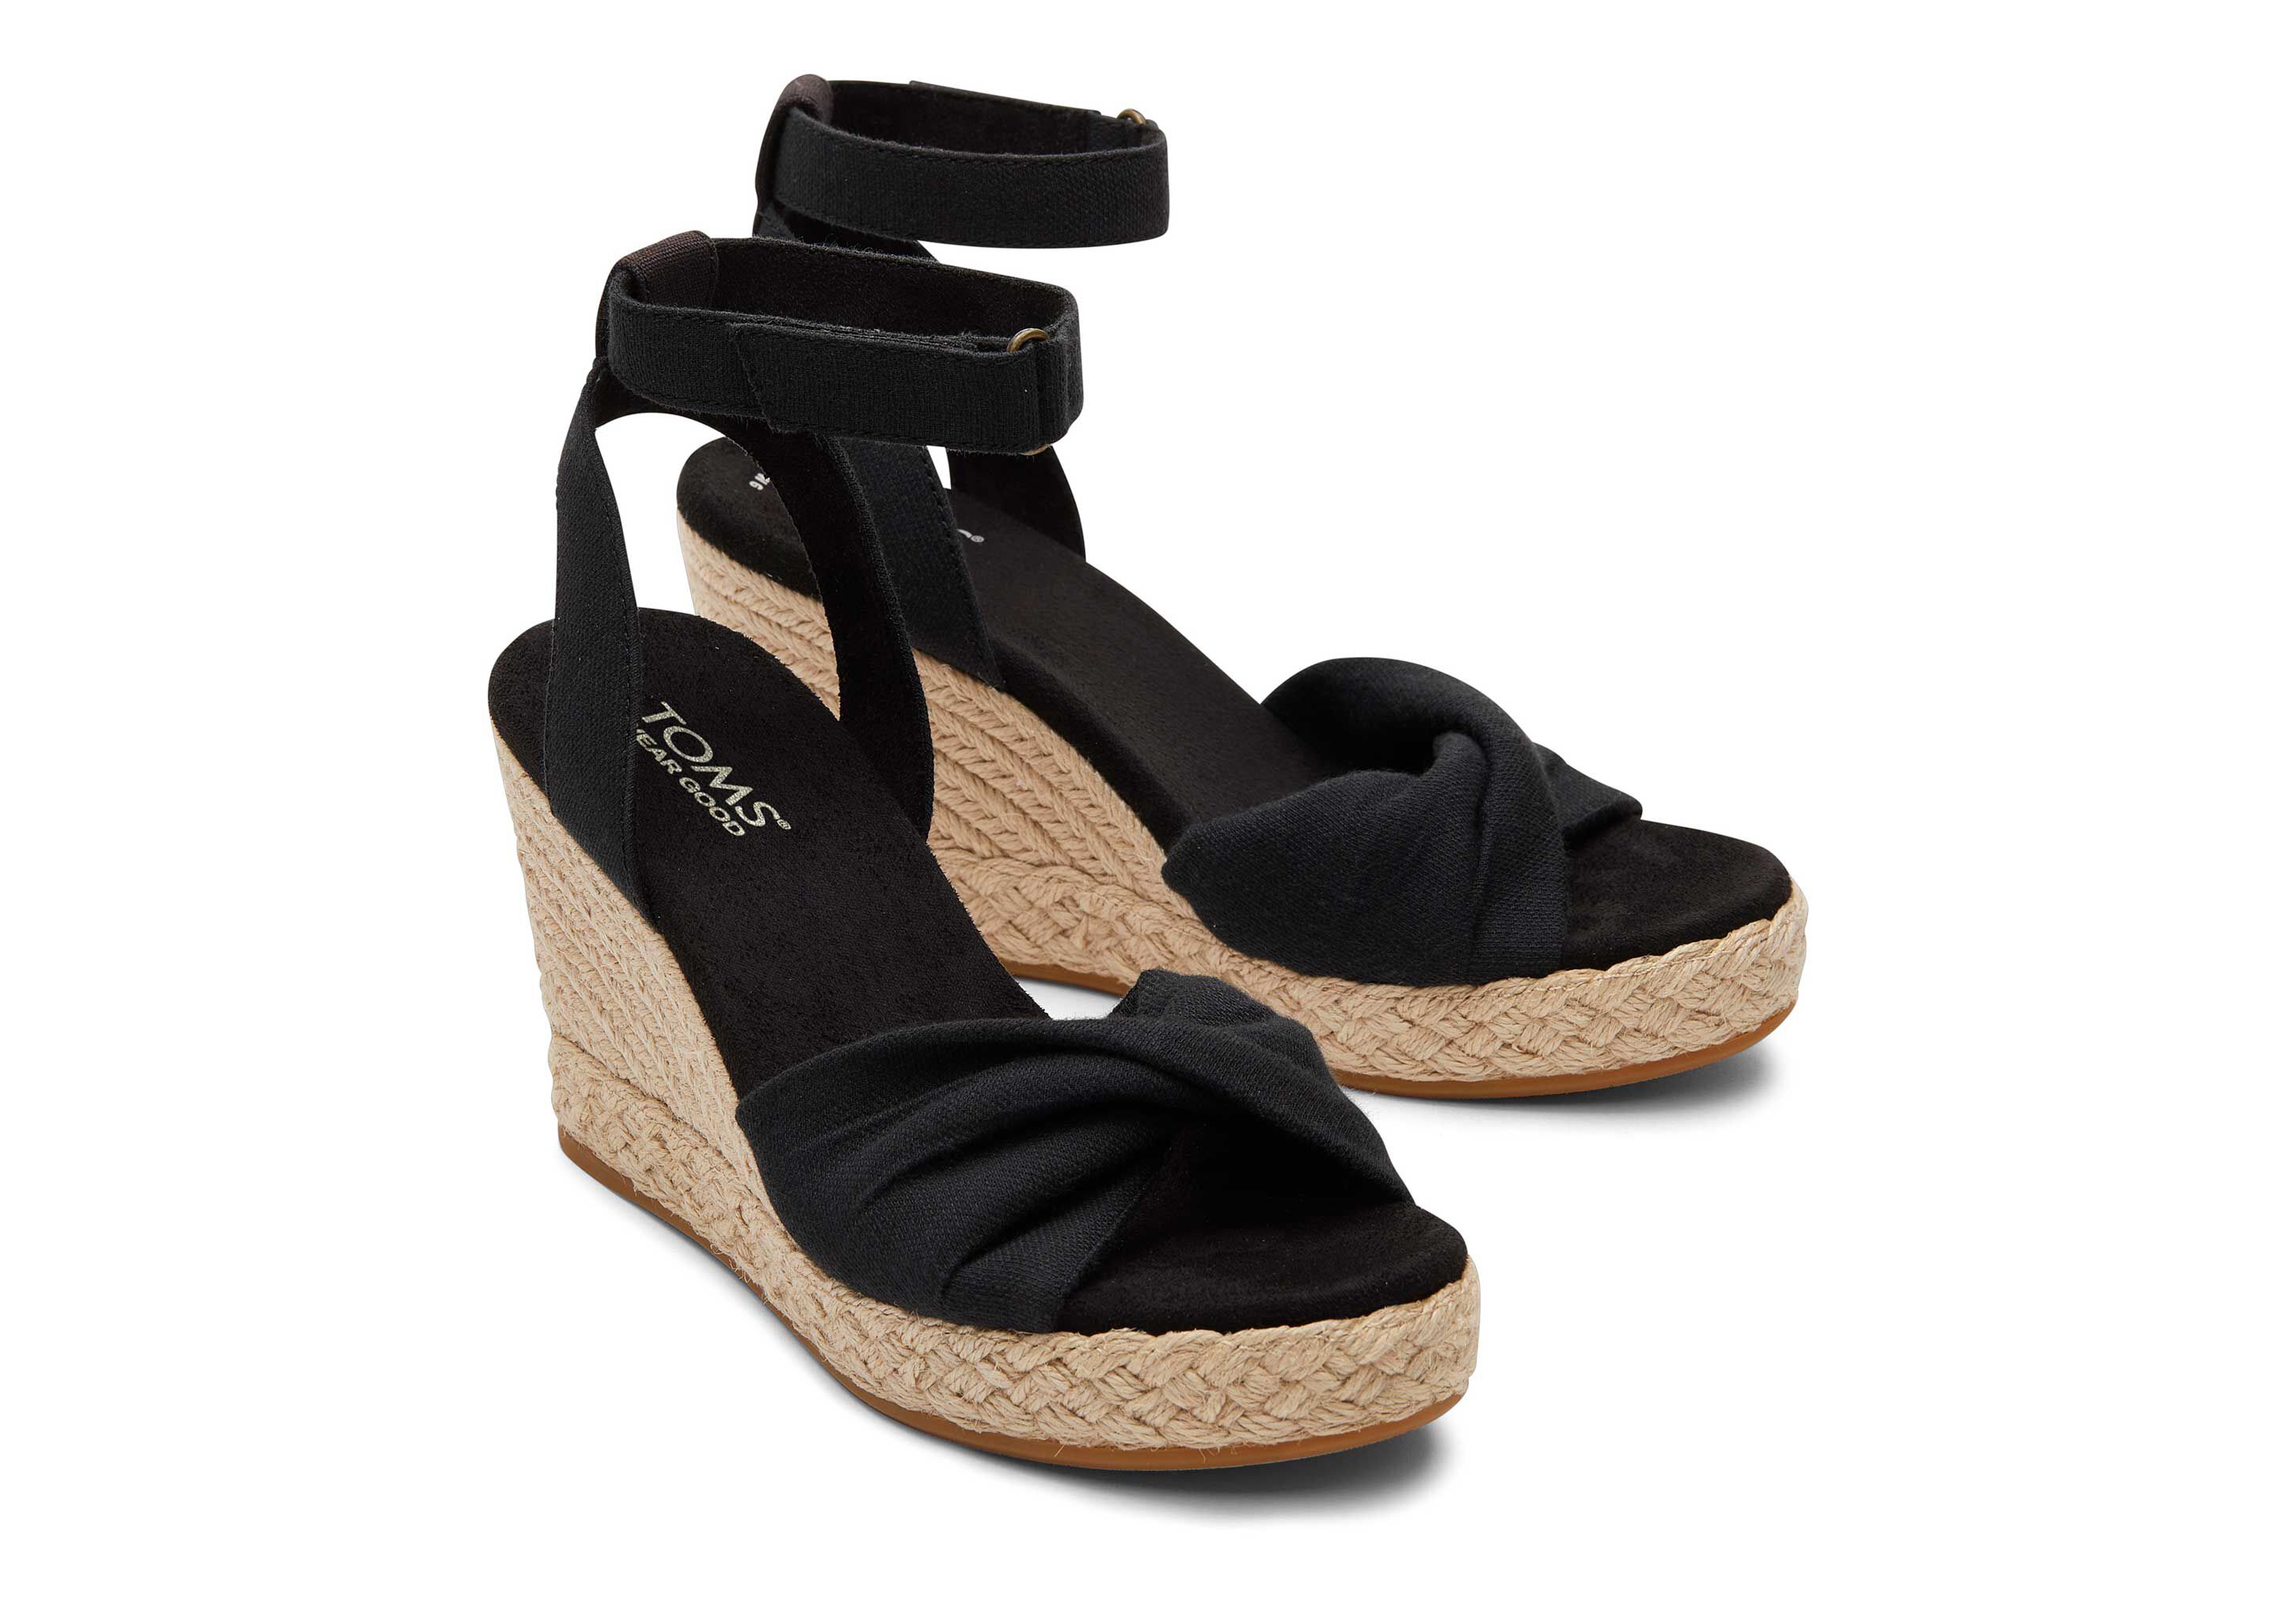 Patent leather wedge sandals in black - Dolce Gabbana | Mytheresa